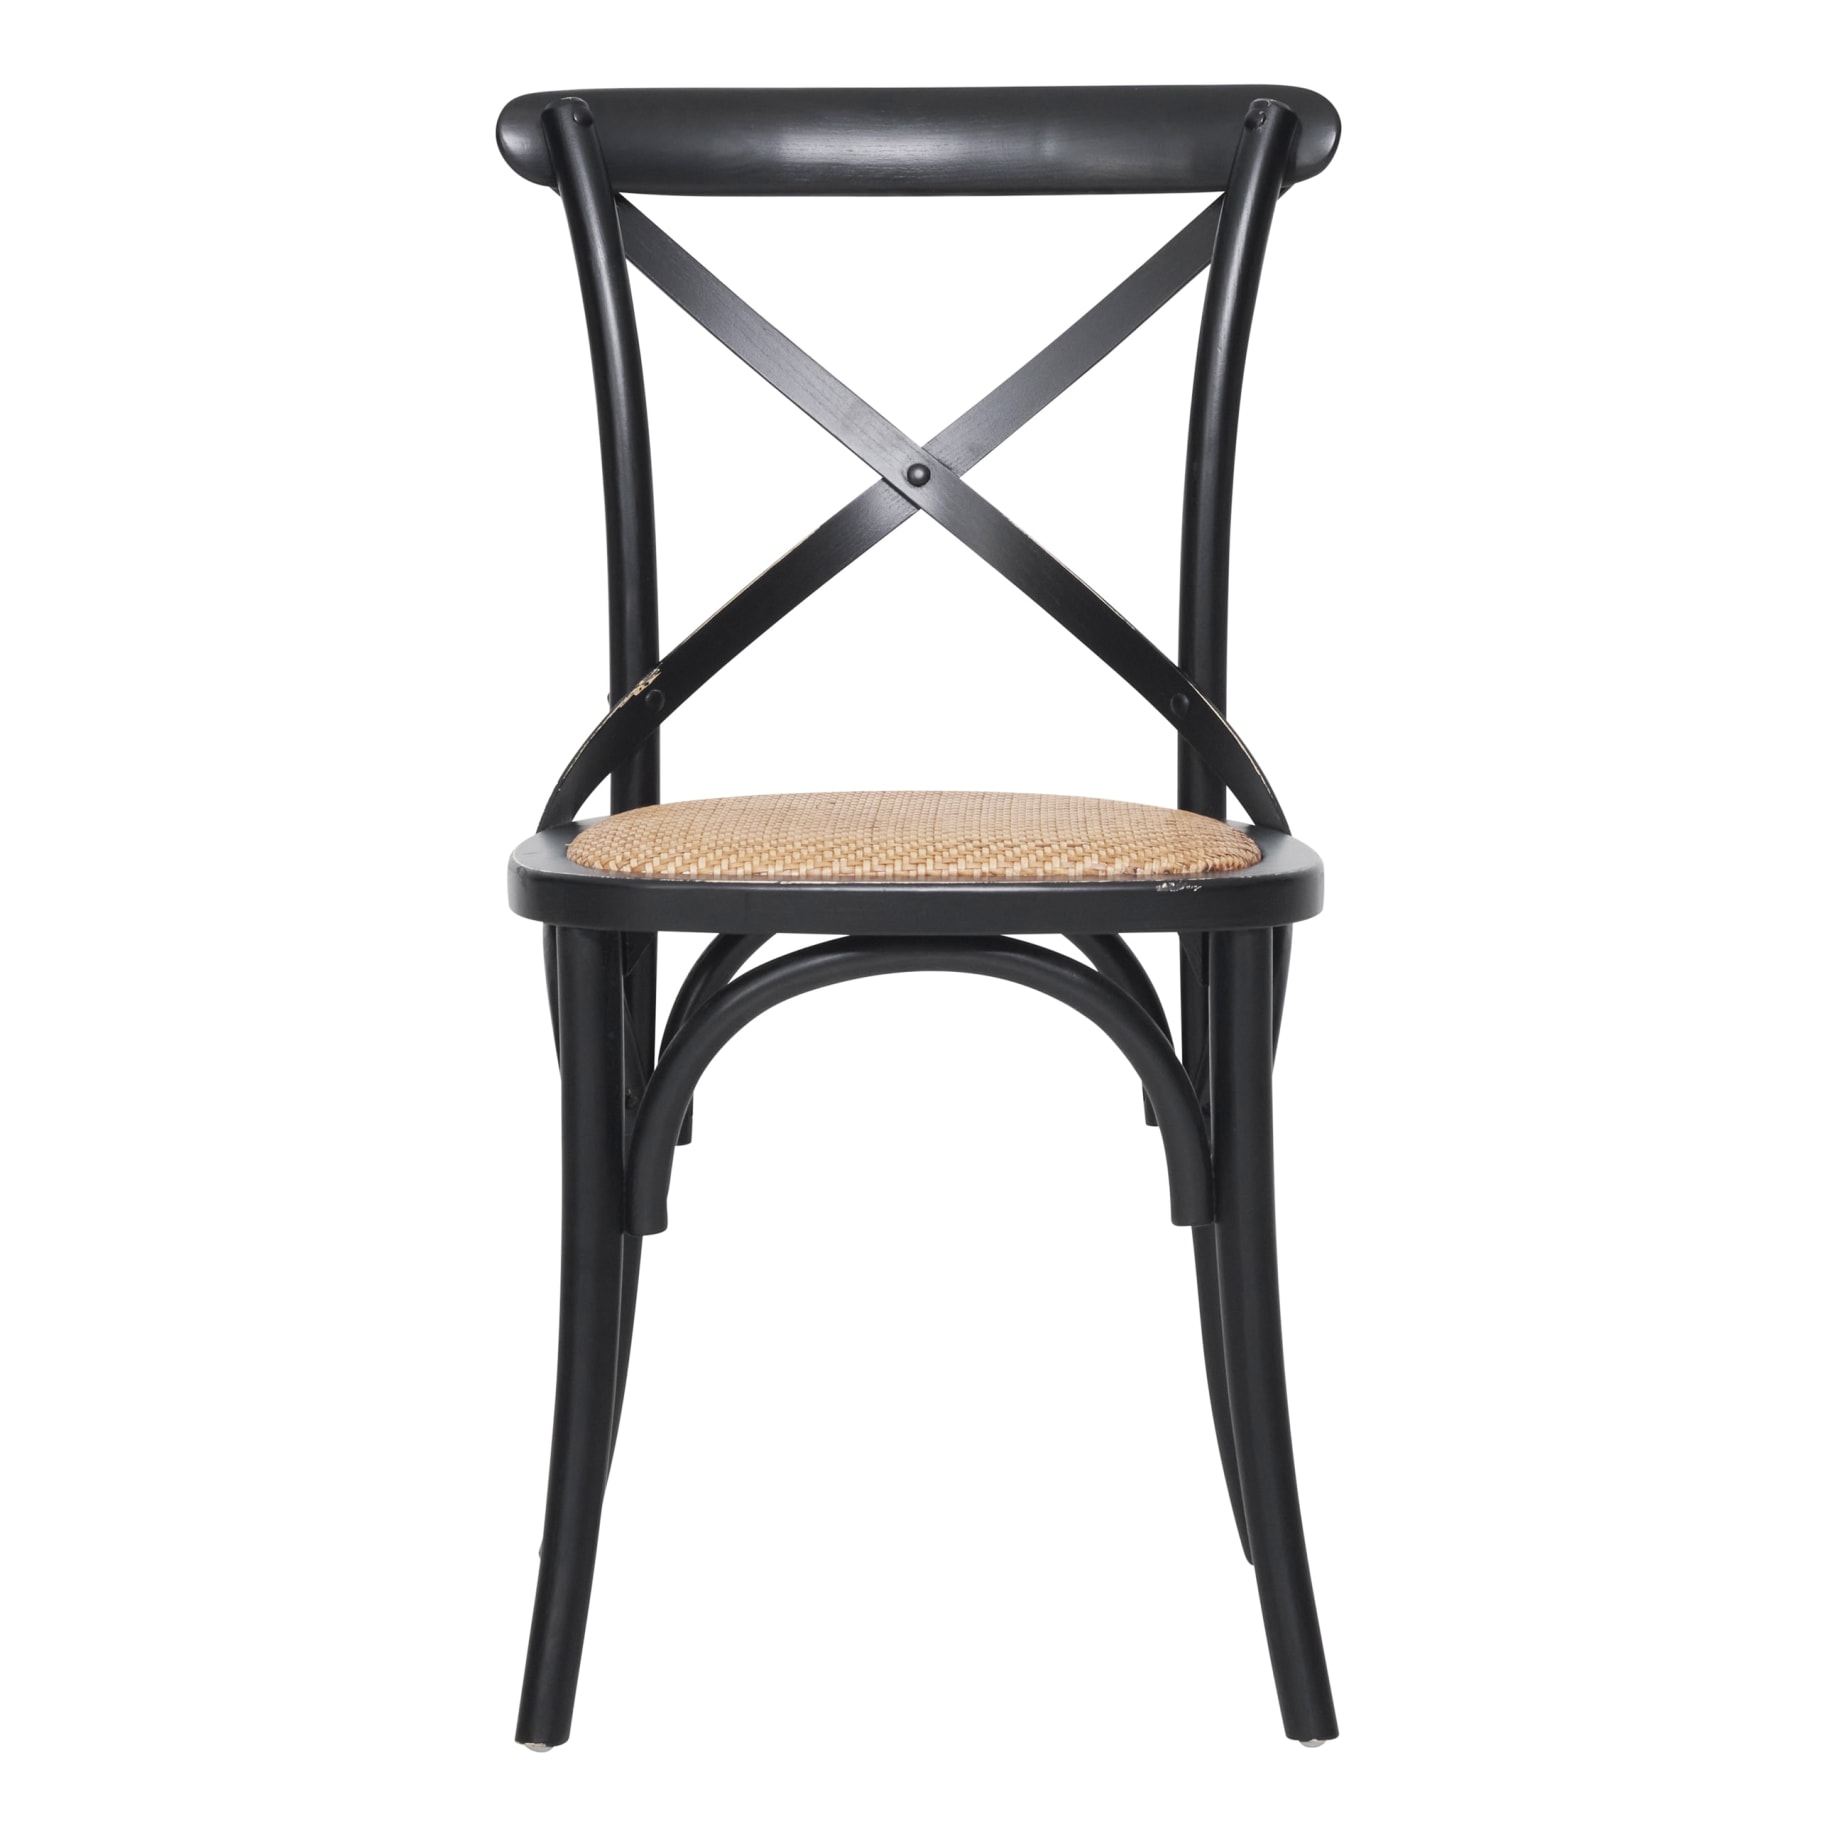 Cristo Cross Back Chair in Weathered Black / Rattan